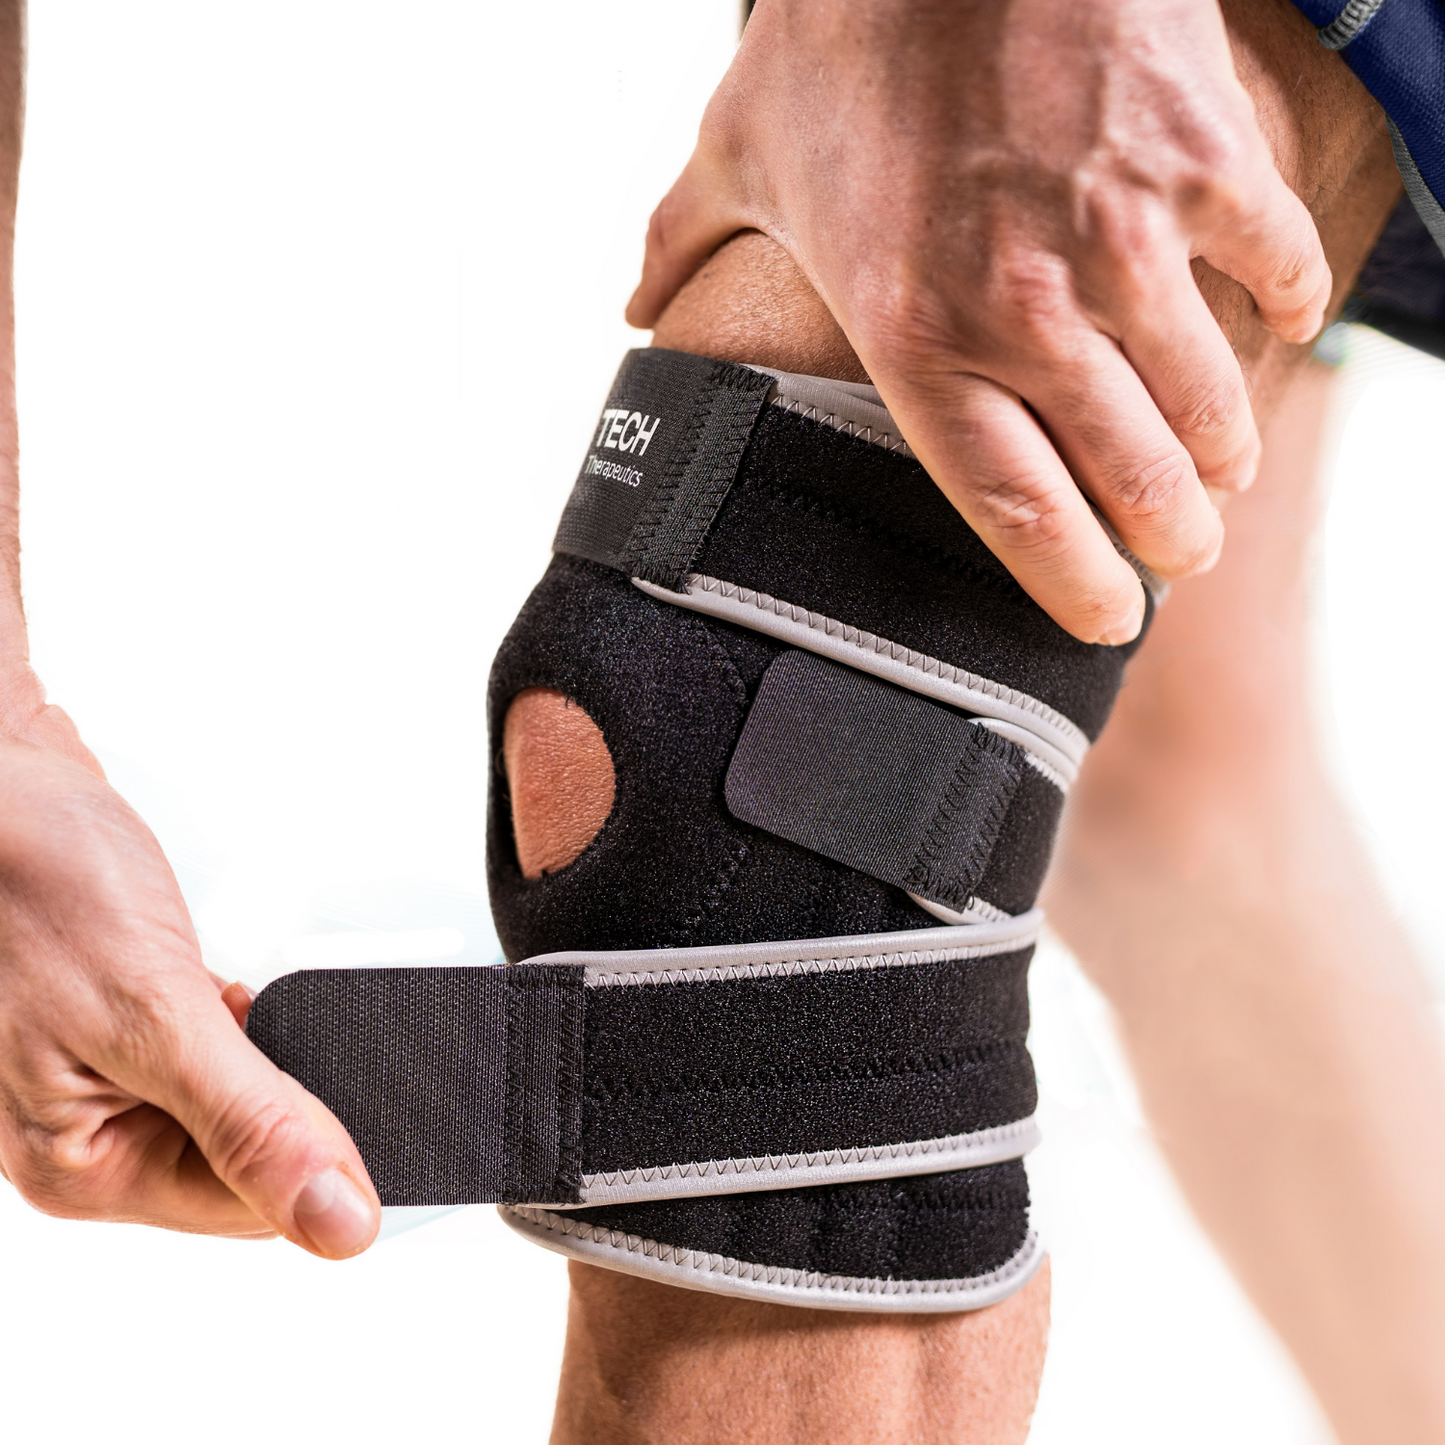 Orthopaedic and Sports Knee Support Brace Adjustable Tech Therapeutics